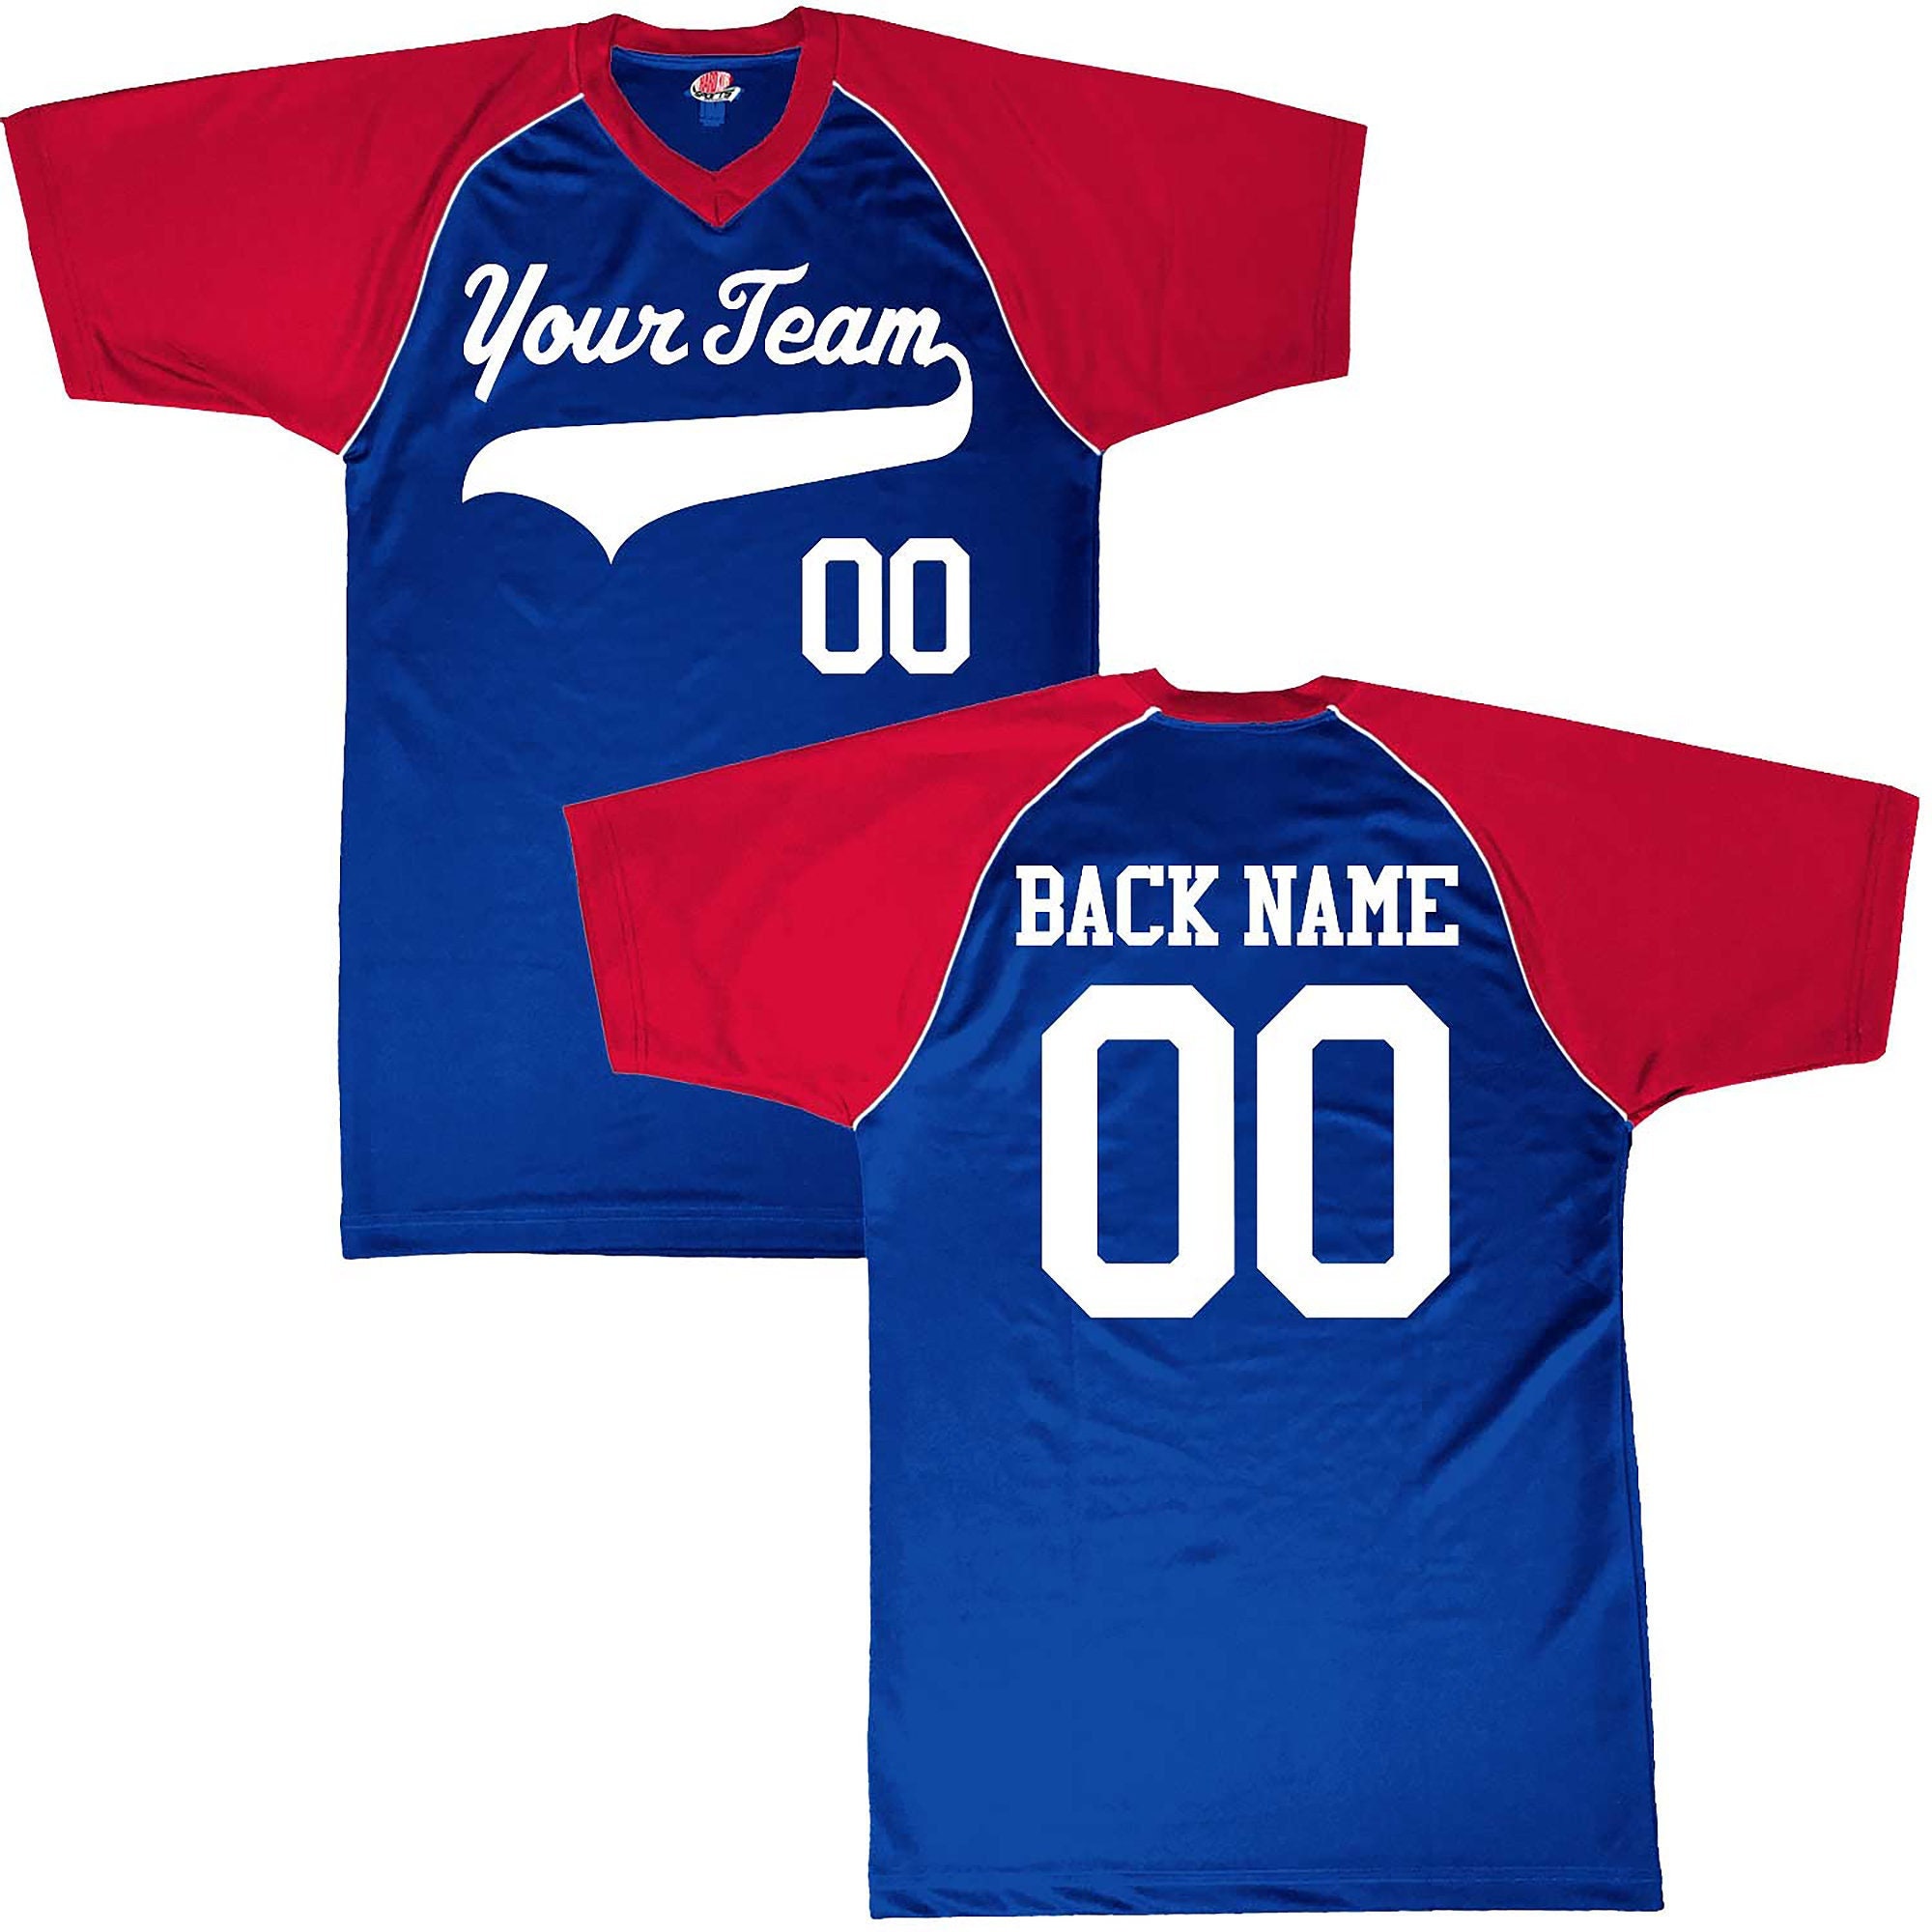 3-Color Economical Custom Baseball Jersey | USA Colors Red, White, Navy & Royal Blue | Custom Jersey with Team, Player, Numbers